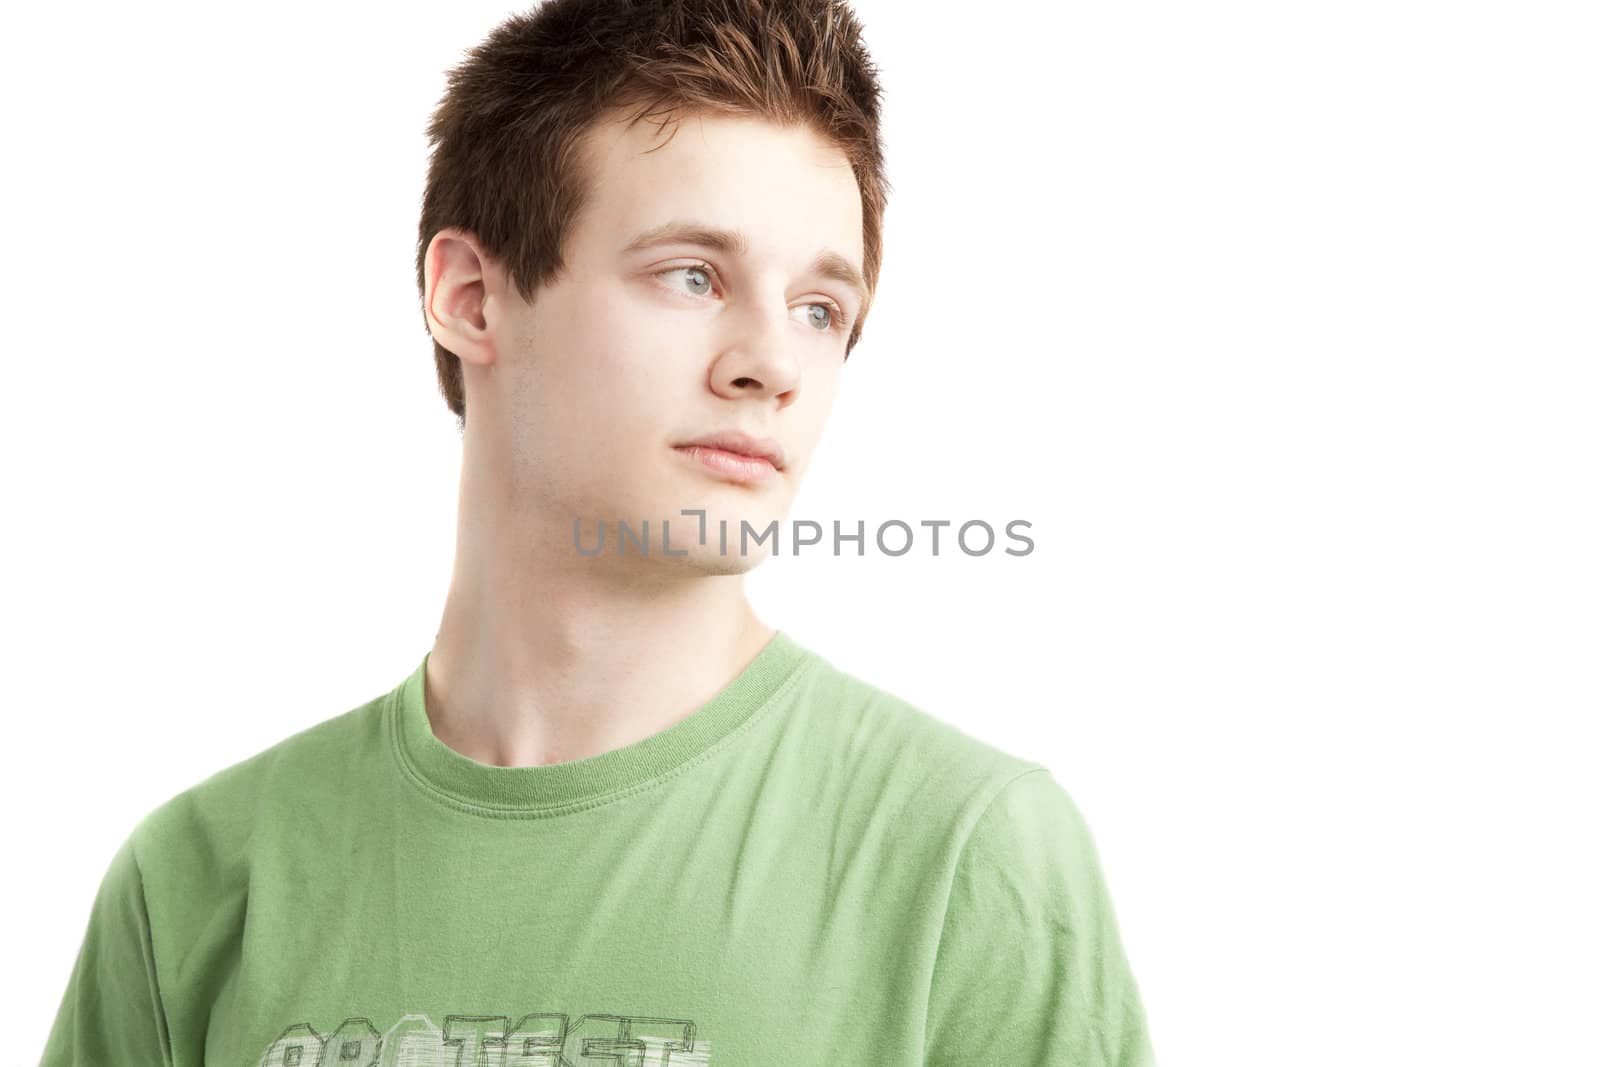 isolated teen aged boy over white background